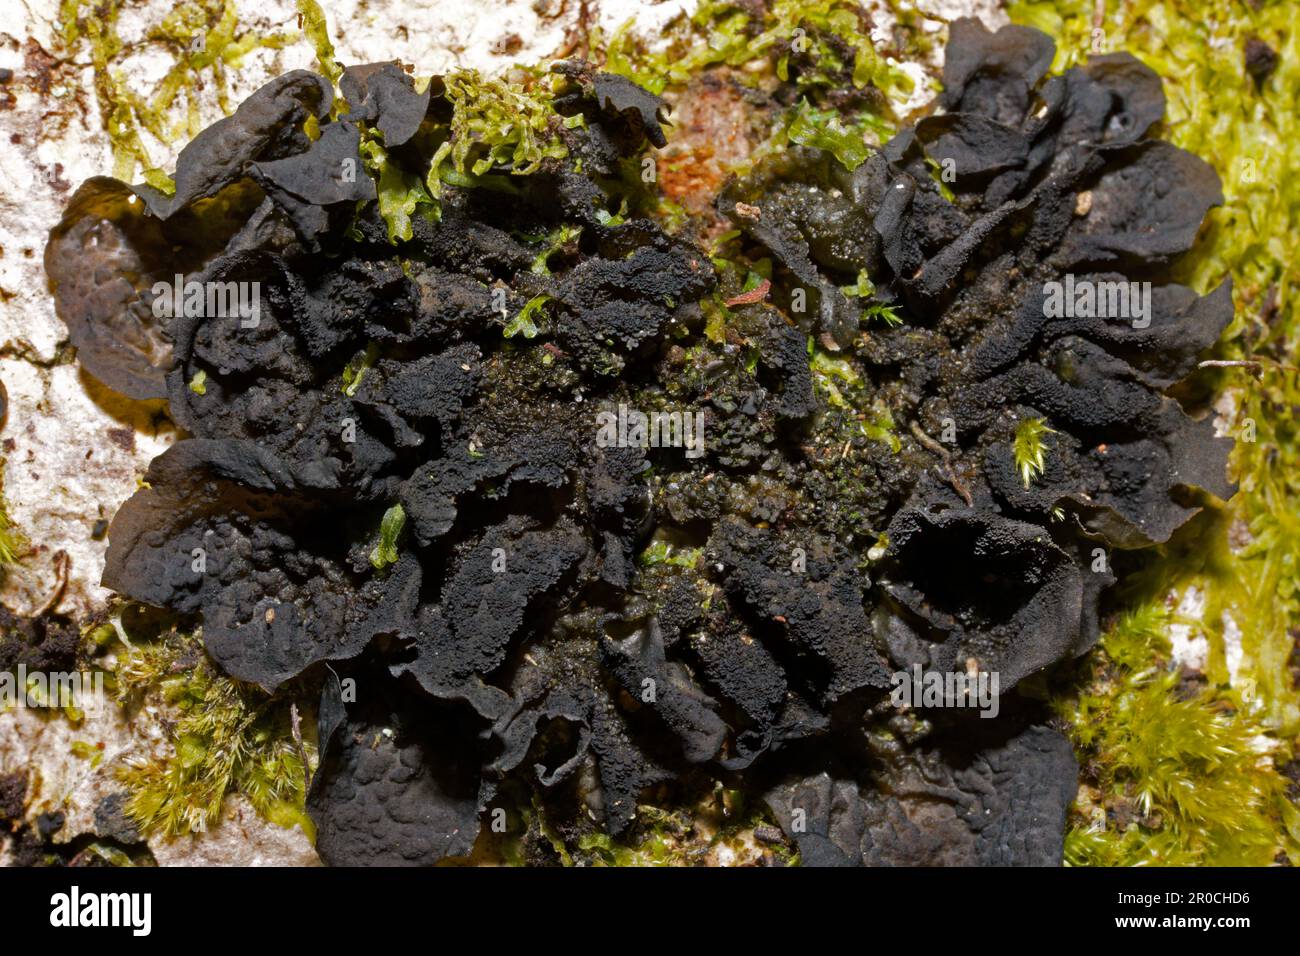 Collema flaccidum is a foliose lichen found on acidic and calcareous rocks by streams and waterfalls. It has a global distribution. Stock Photo